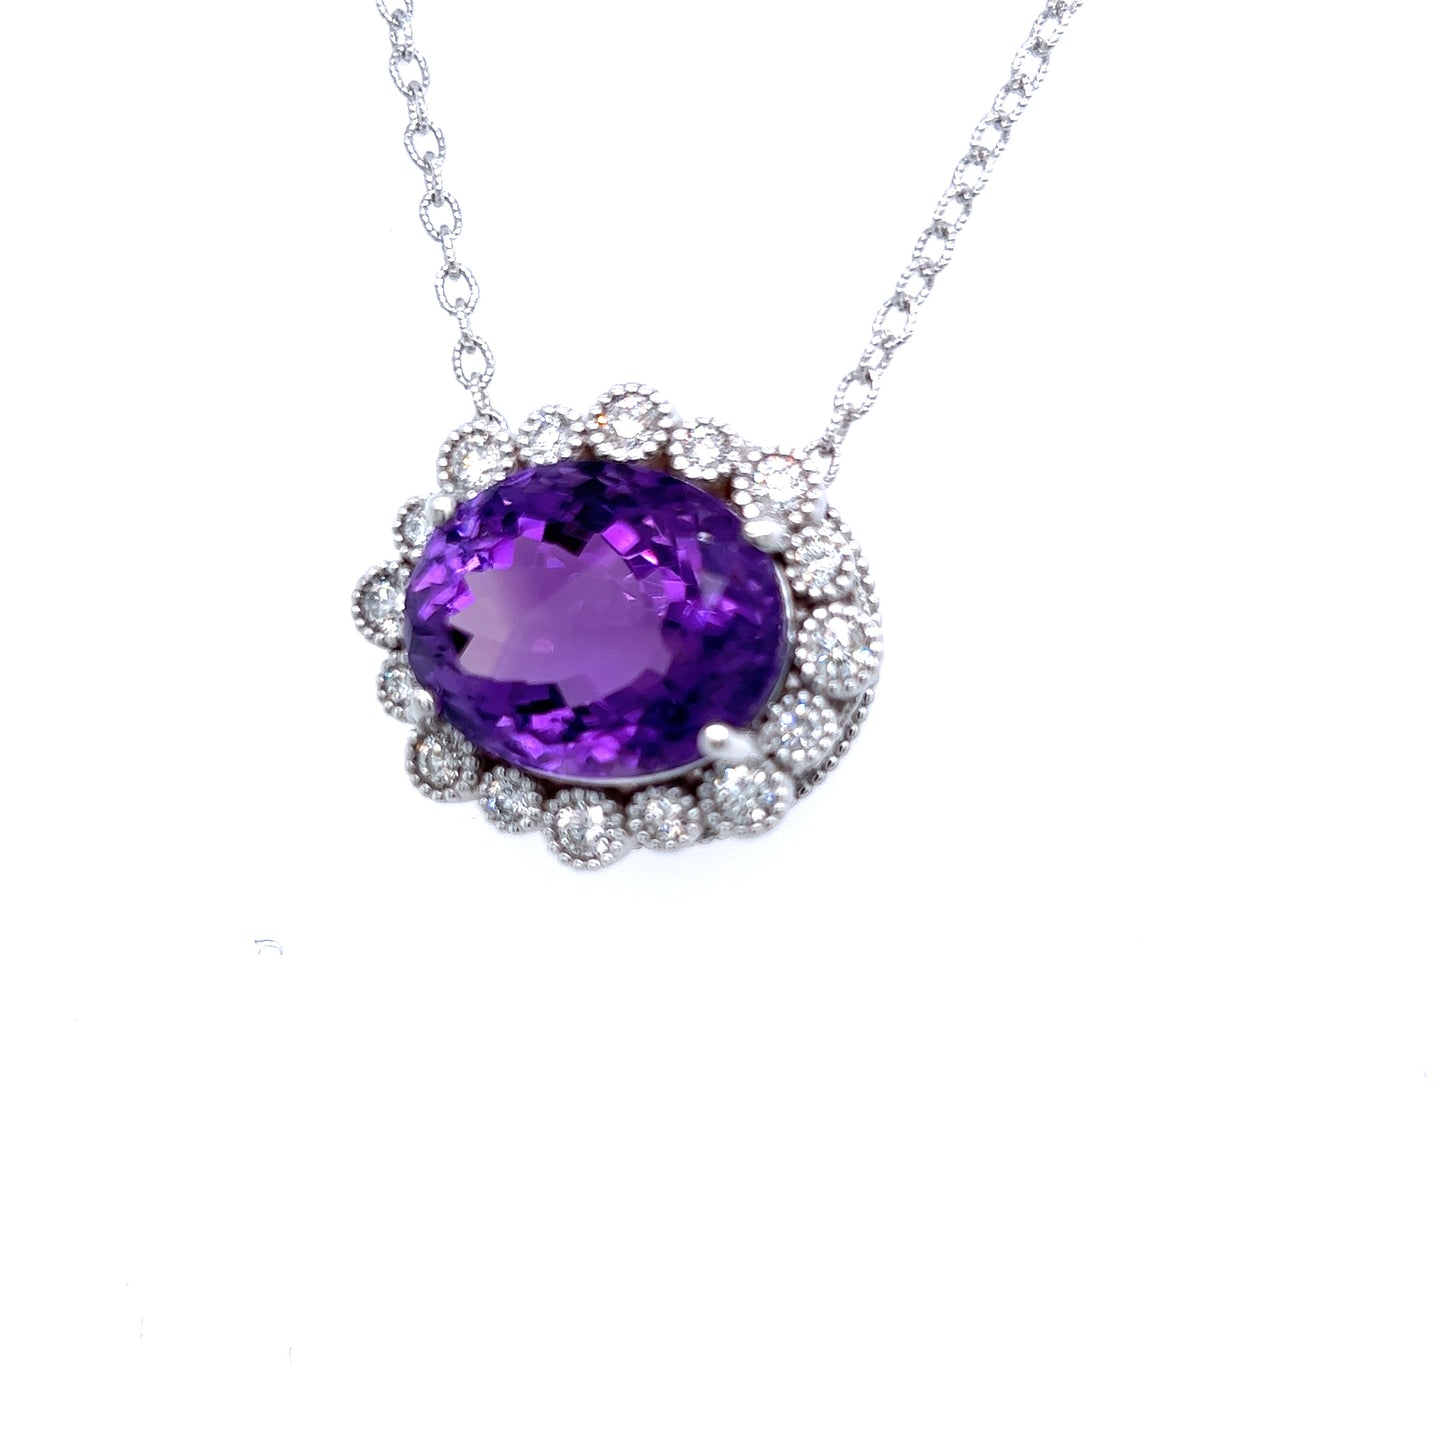 Natural Amethyst Diamond Pendant With Chain 17.5" 14k W Gold 15.51 TCW Certified $5,975 216891 - Certified Fine Jewelry